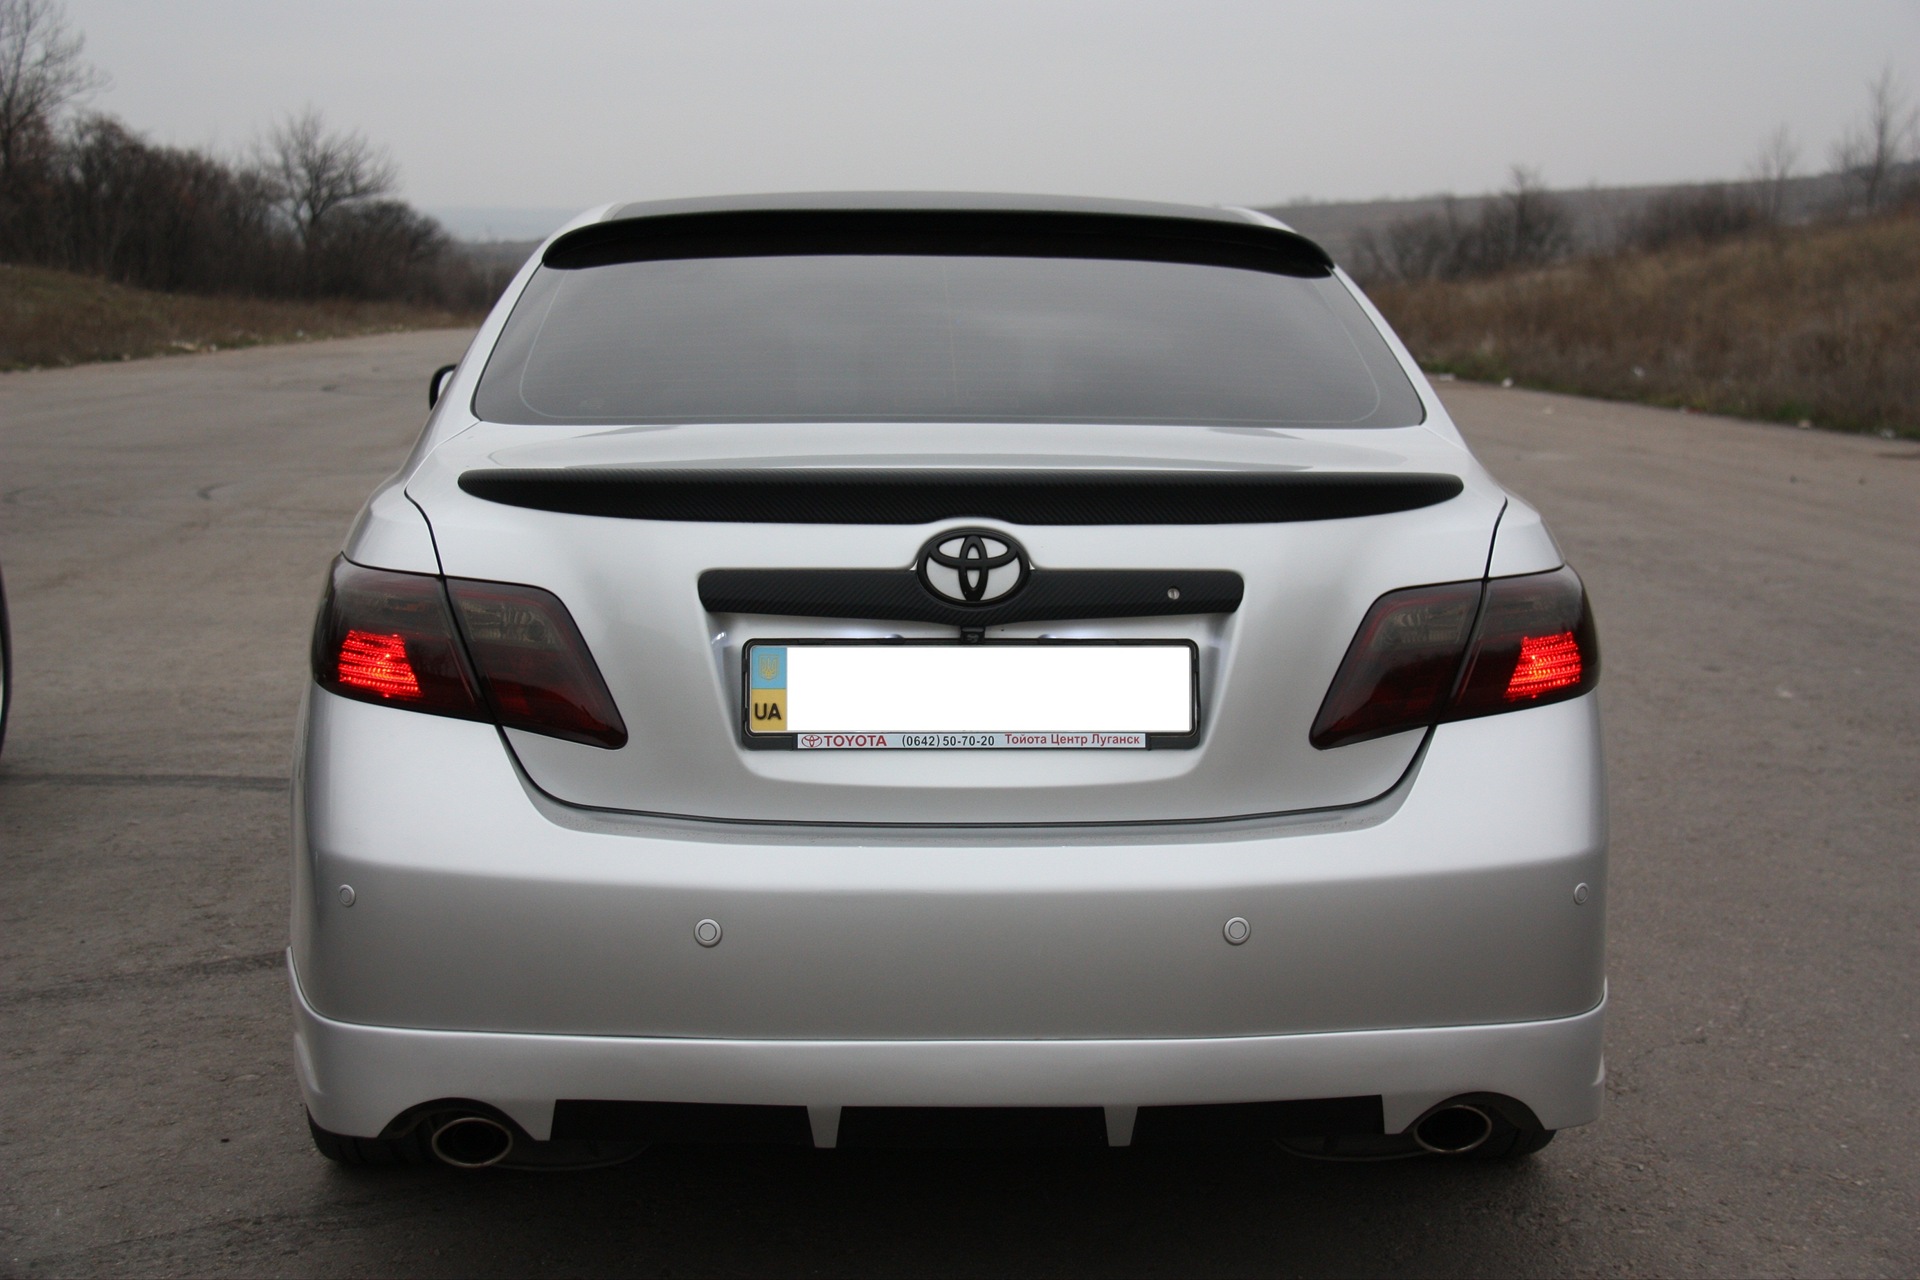 We tighten the interior elements spoiler and mirrors with carbon fiber  - Toyota Camry 35 L 2008